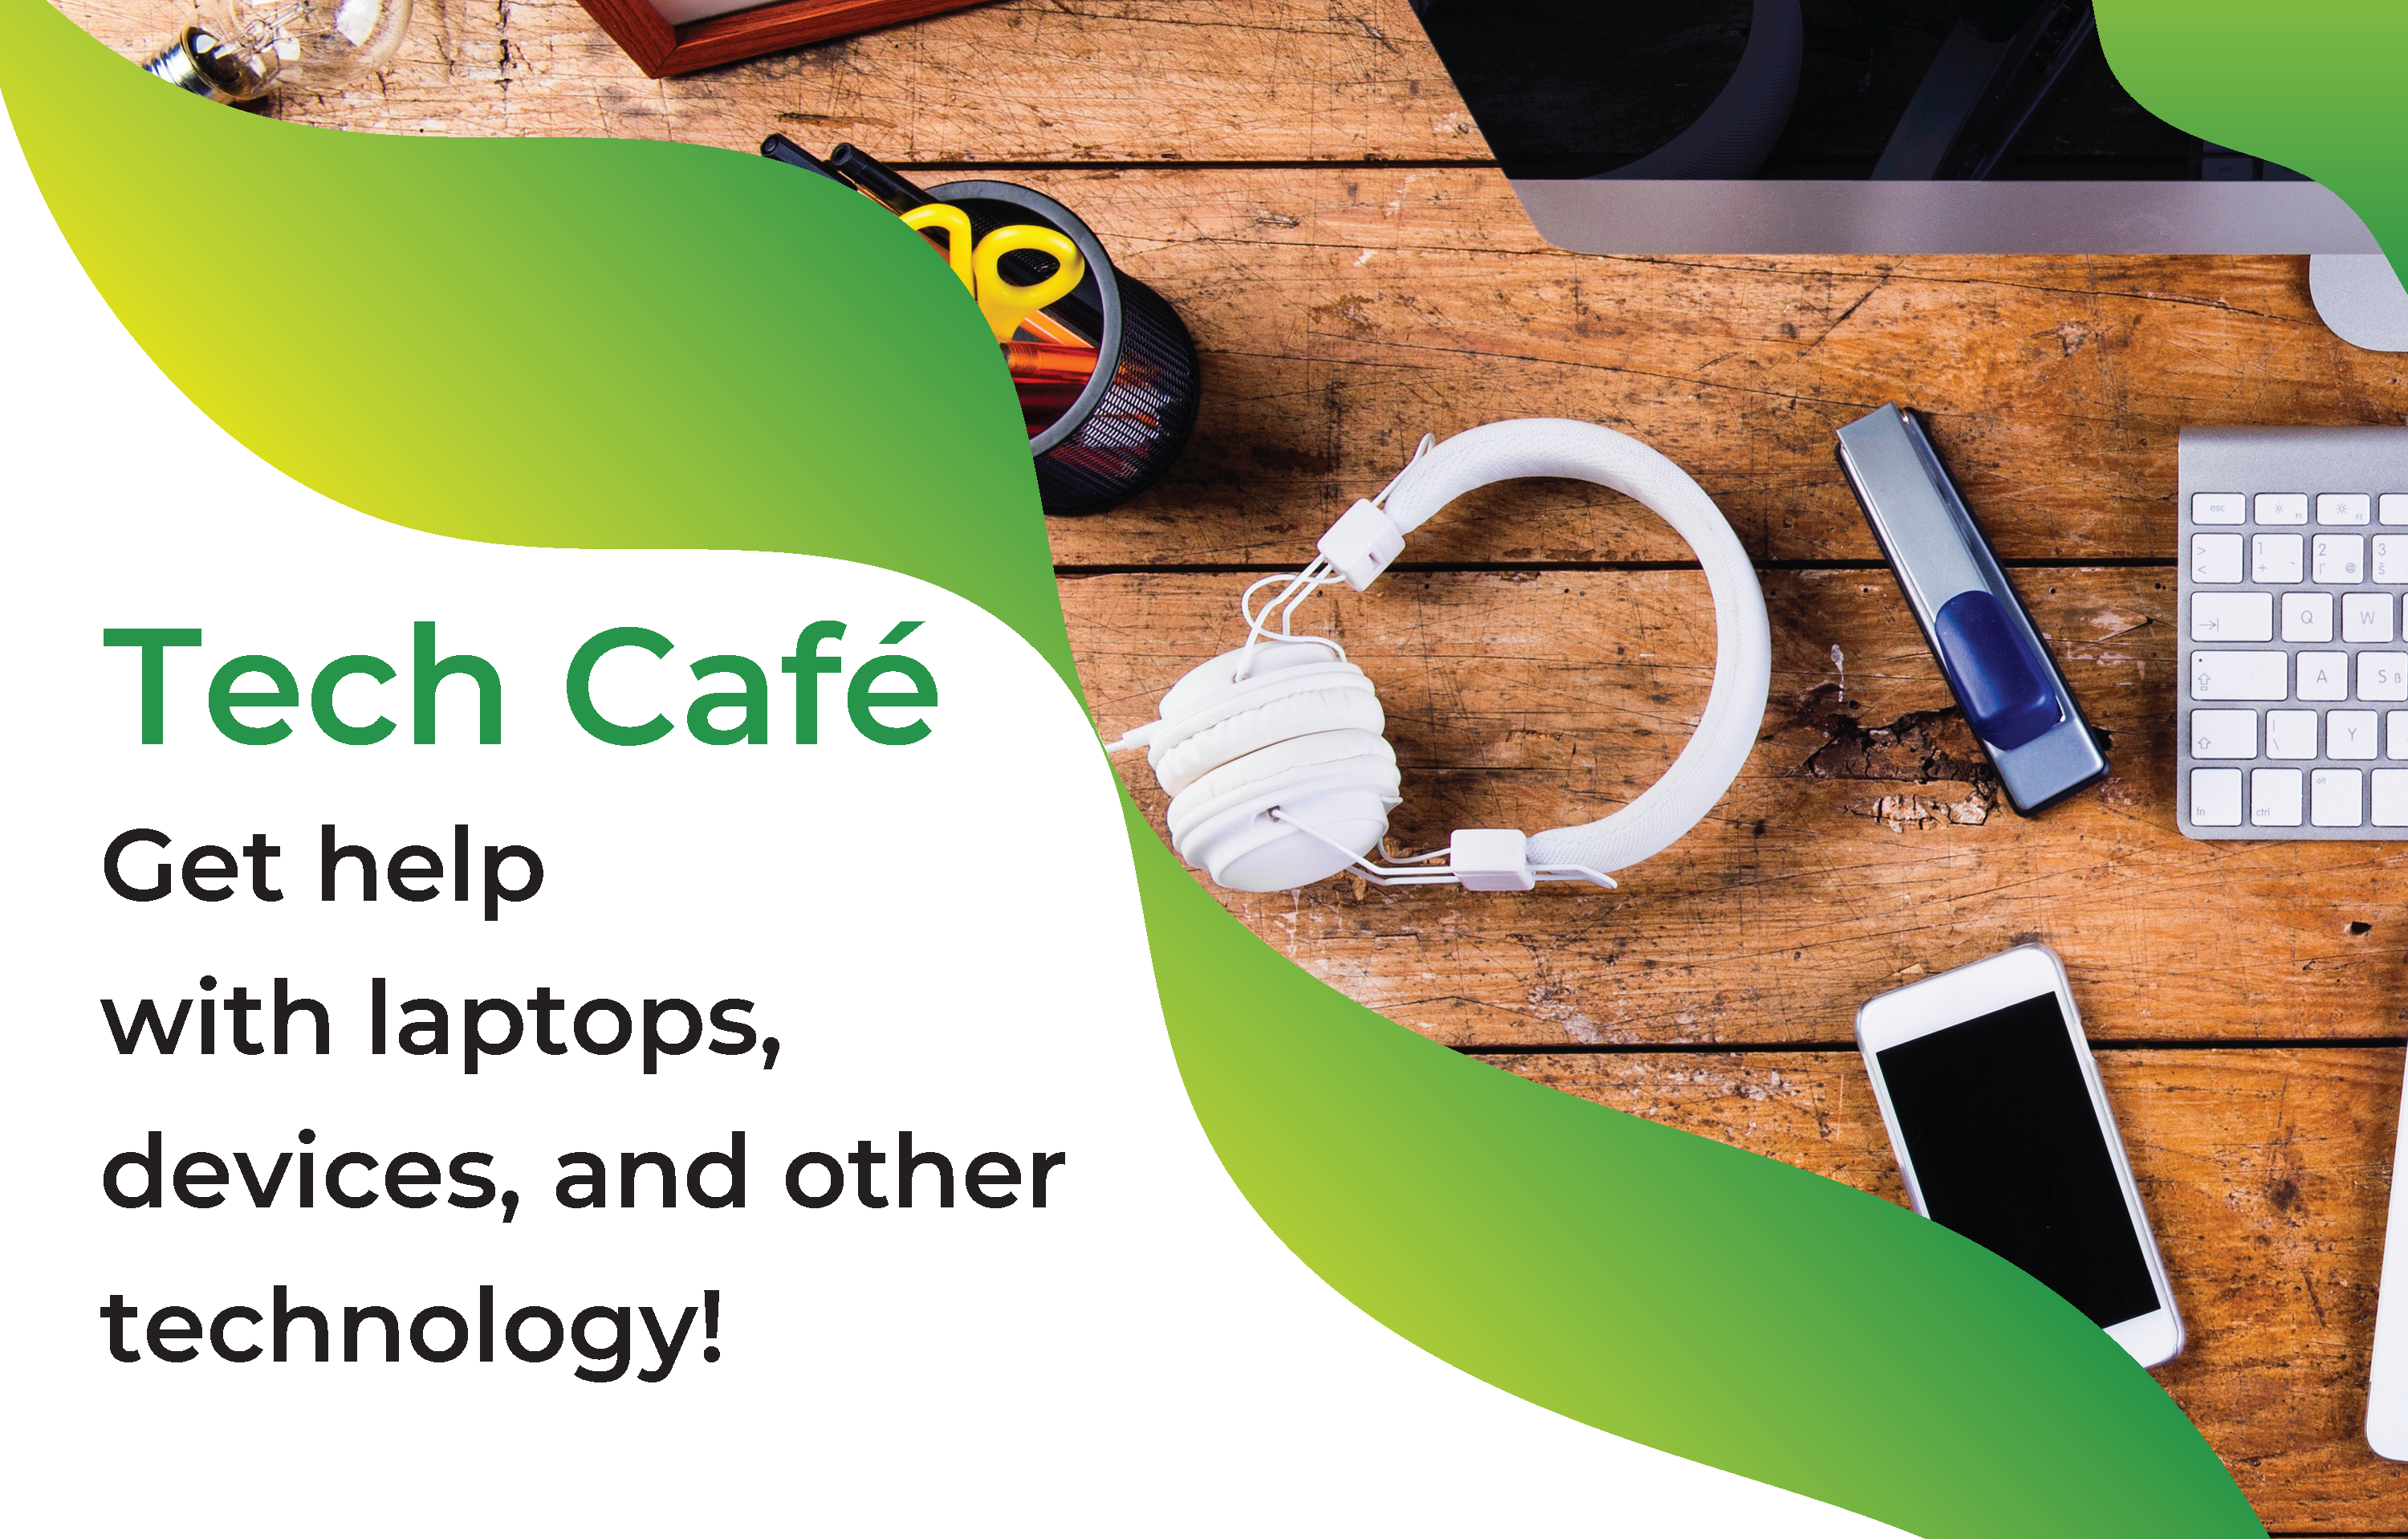 Tech Cafe - get help with laptops, devices, and other technology